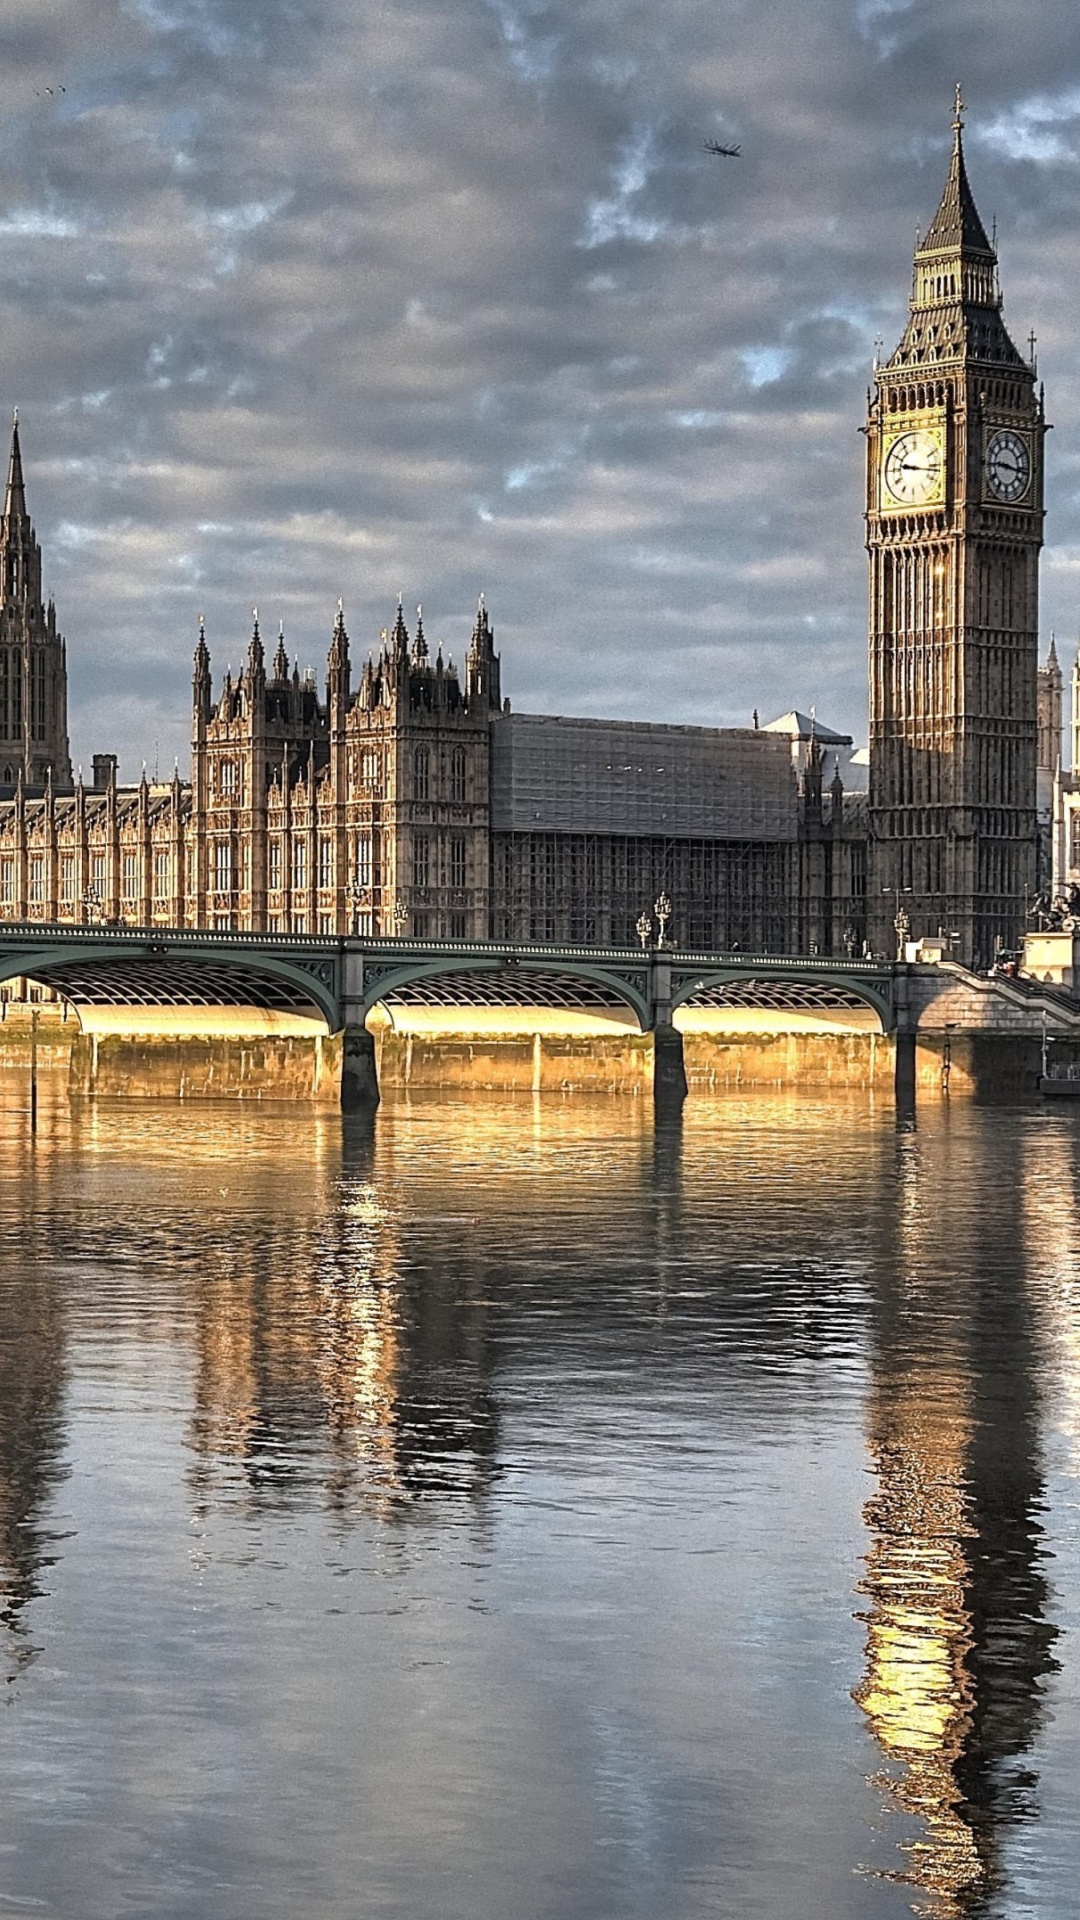 Palace of Westminster in London screenshot #1 1080x1920